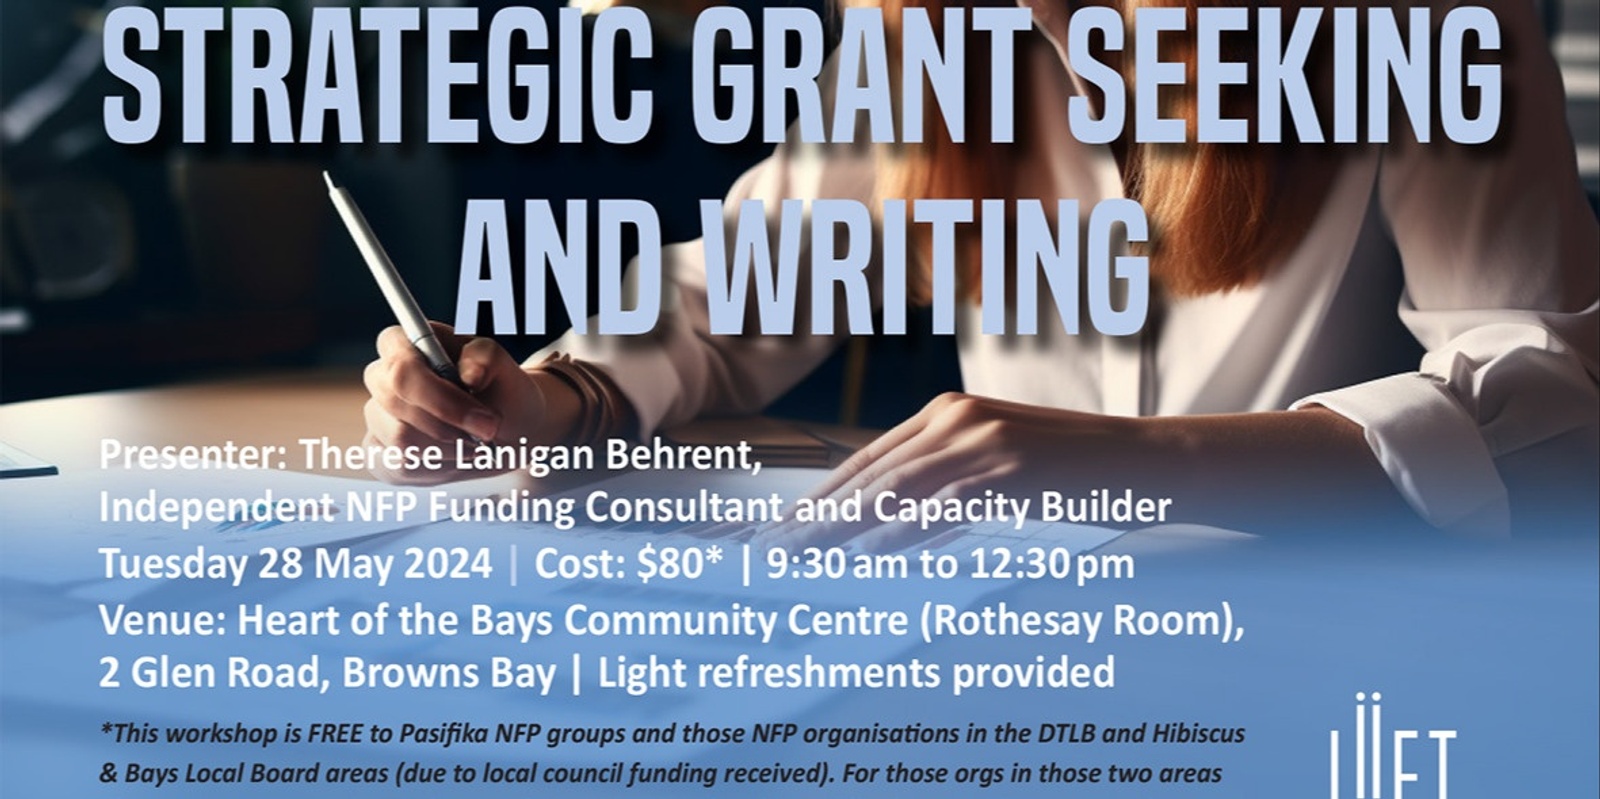 Banner image for Strategic Grant Seeking and Writing in-person workshop in Browns Bay (FREE for some groups)